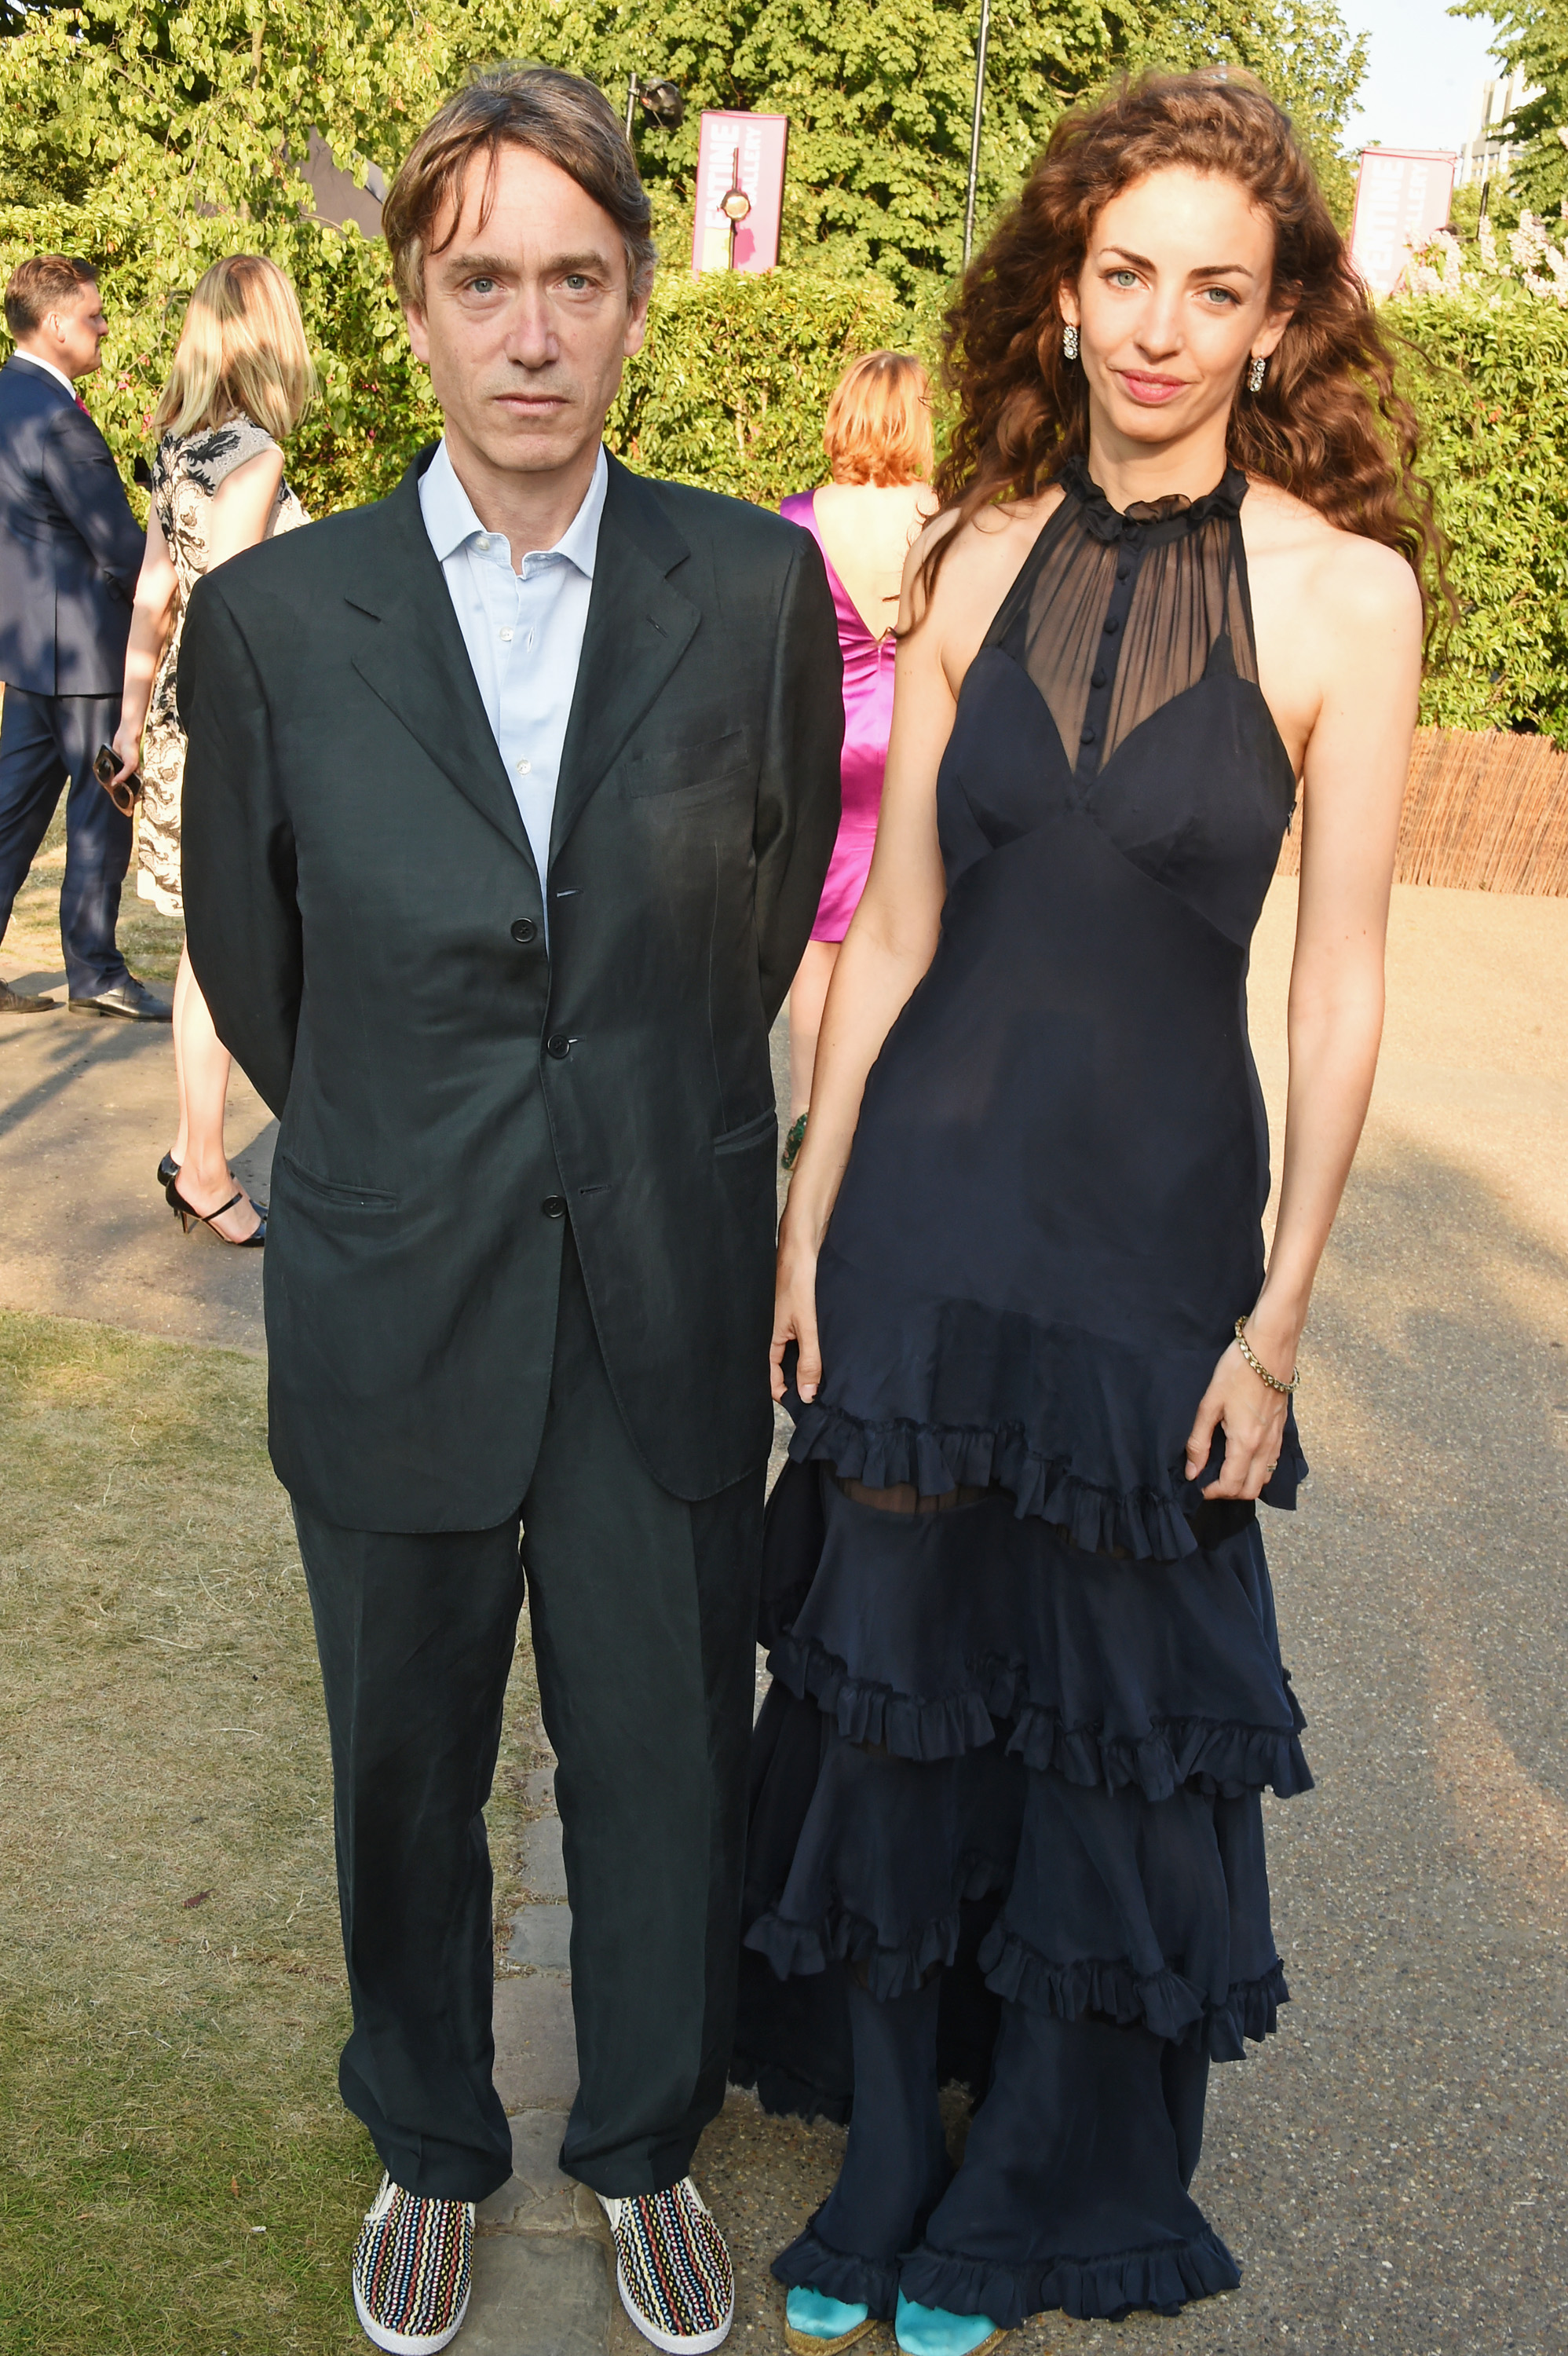 David Rocksavage, the Marquess of Cholmondeley and Rose Hanbury, Marchioness of Cholmondeley at the The Serpentine Gallery summer party in London, England on July 2, 2015 | Source: Getty Images